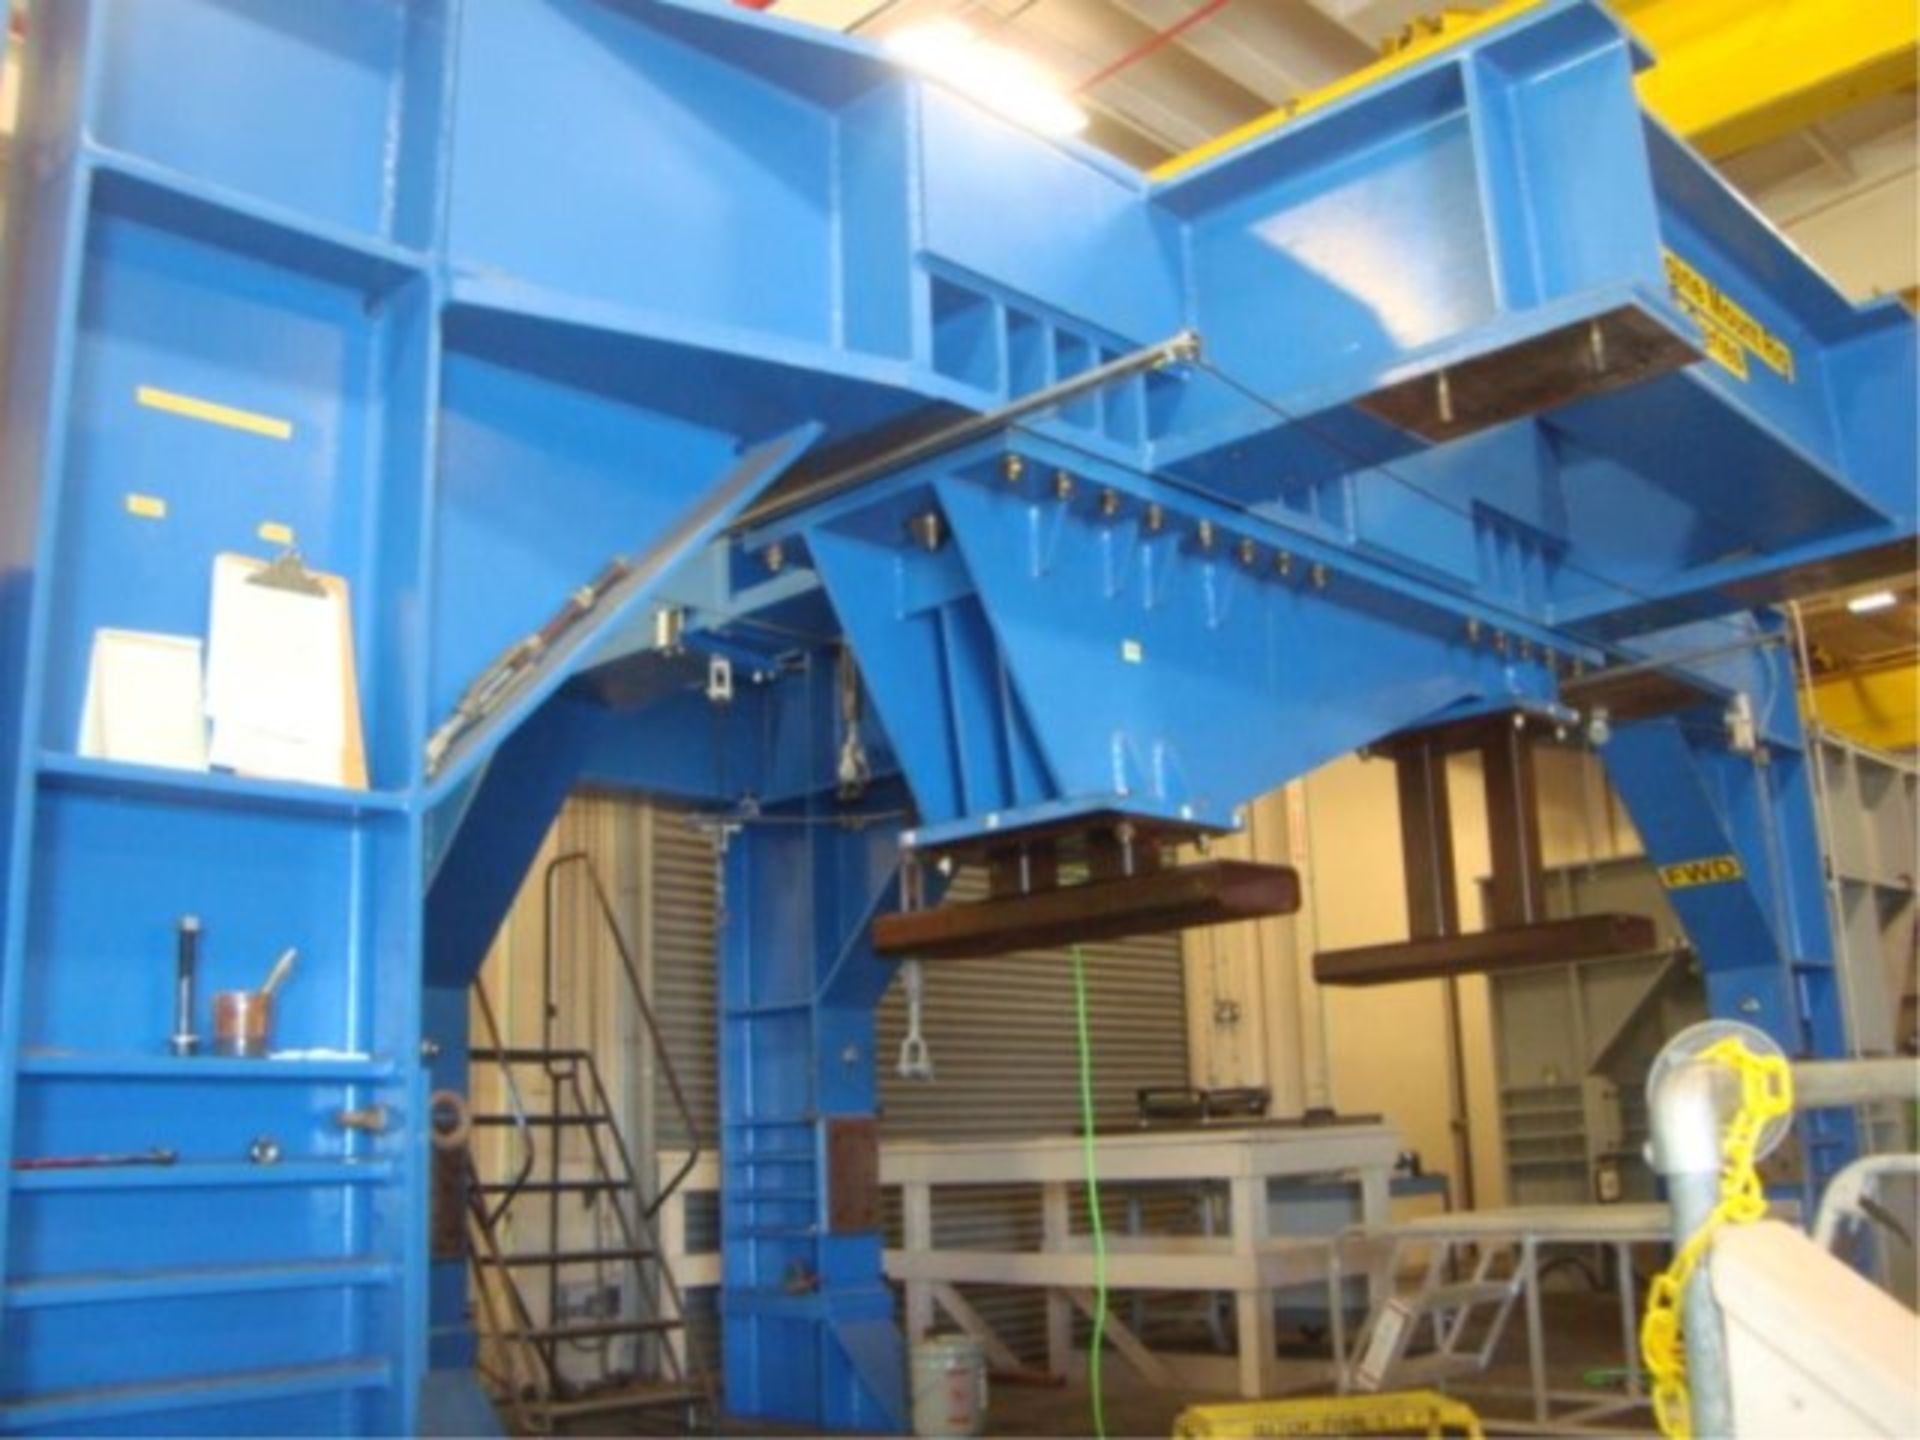 Heavy Duty Engine Mount Test Stand - Image 18 of 18